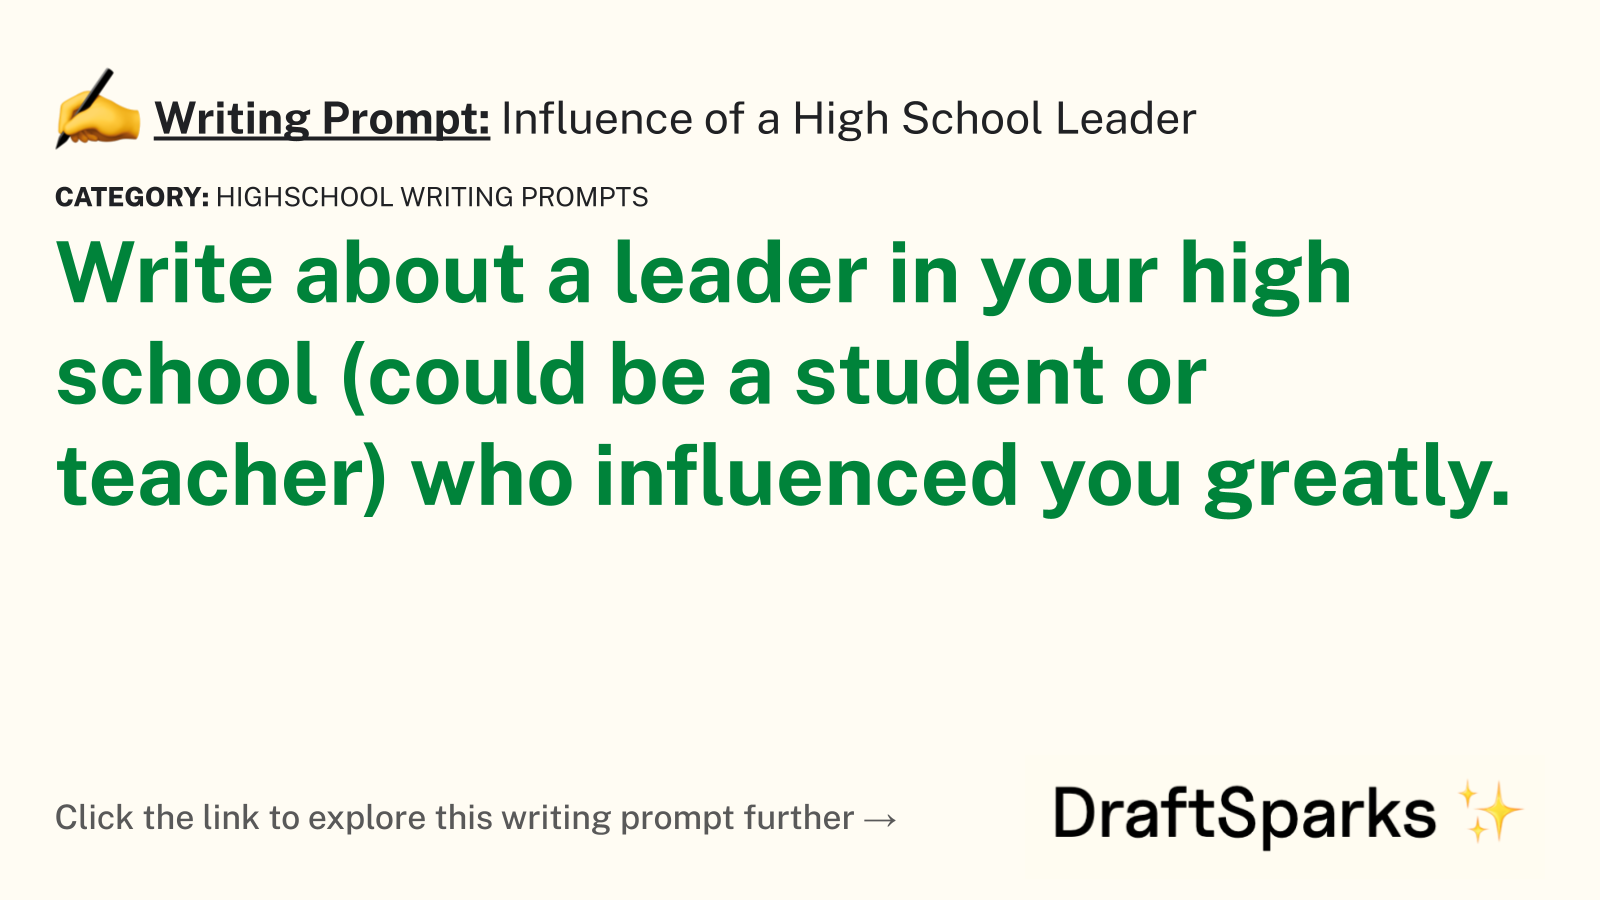 Influence of a High School Leader